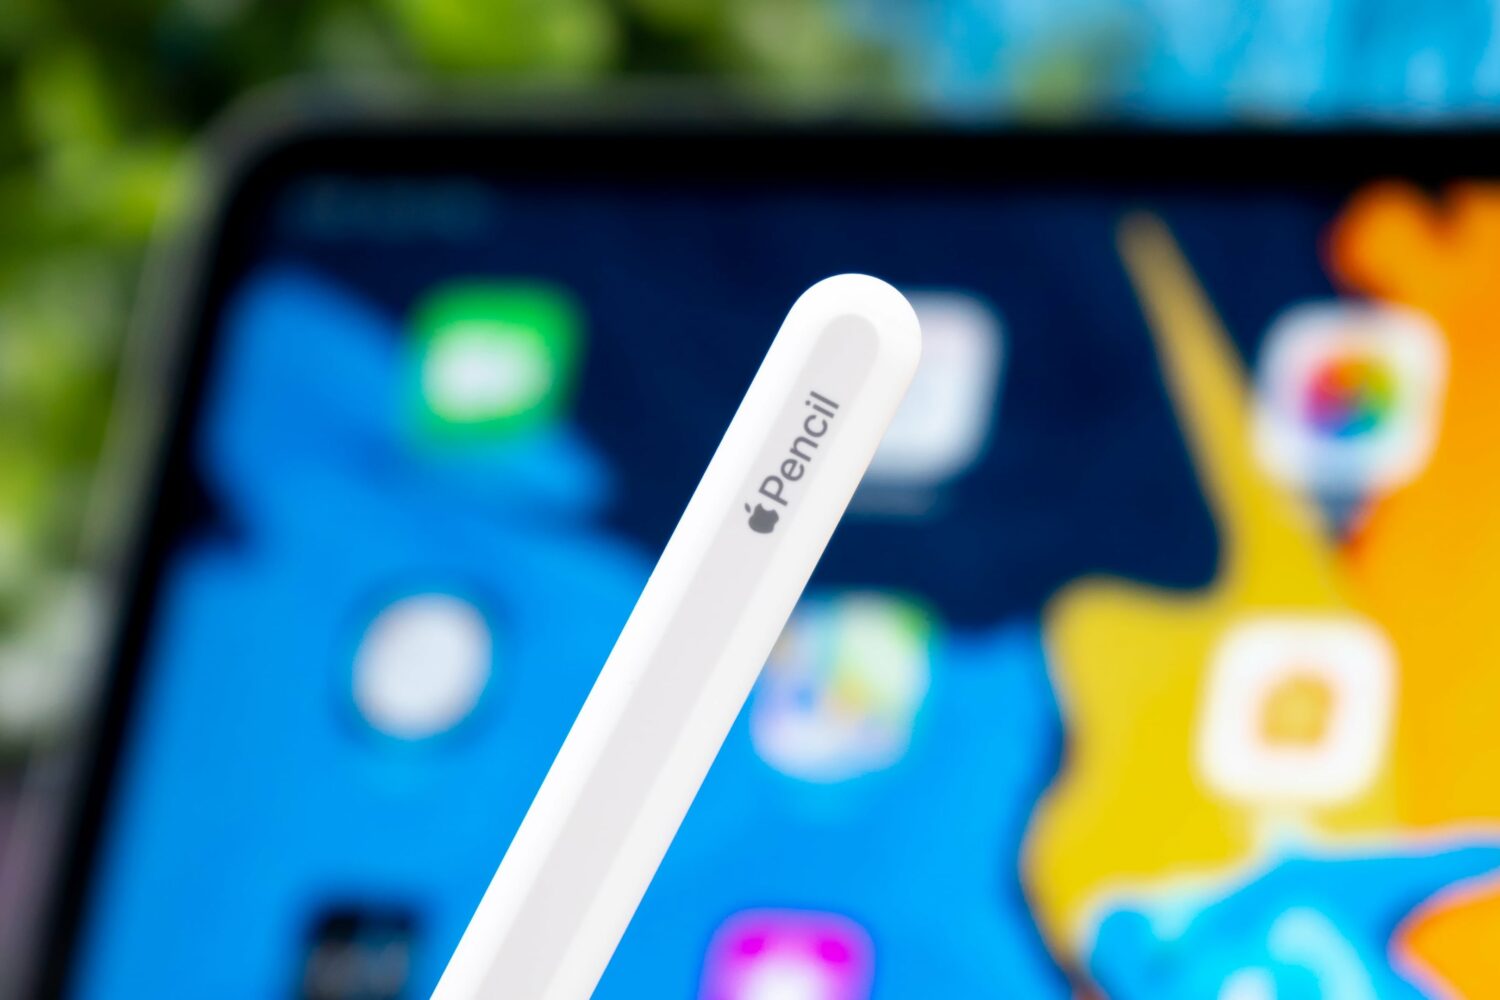 Closeup showcasing the end of Apple Pencil with branding, with a blurred iPad Pro in the background